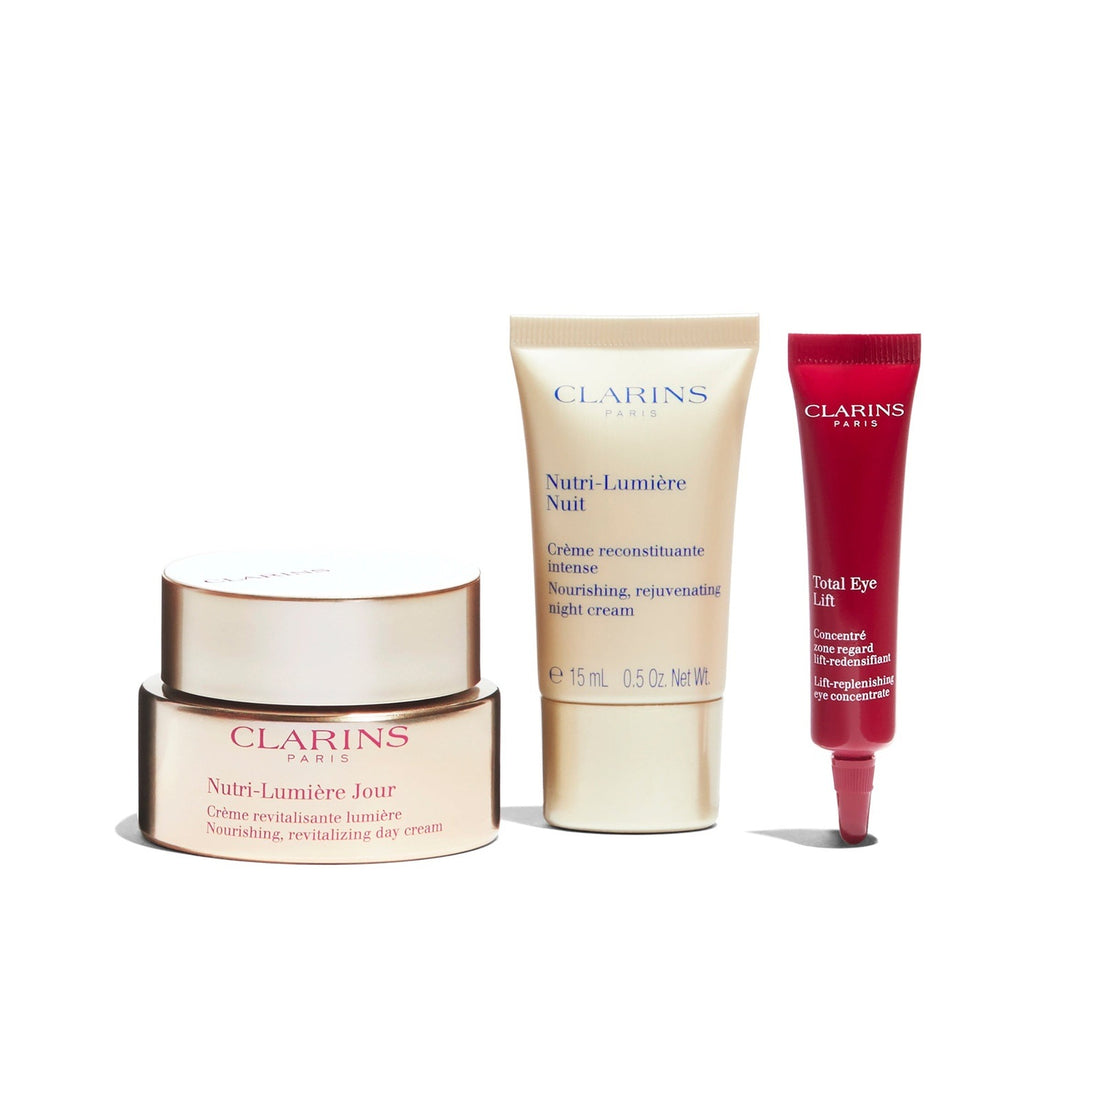 Clarins Nutri-Lumiere Value Pack 2 Shaws Department Stores